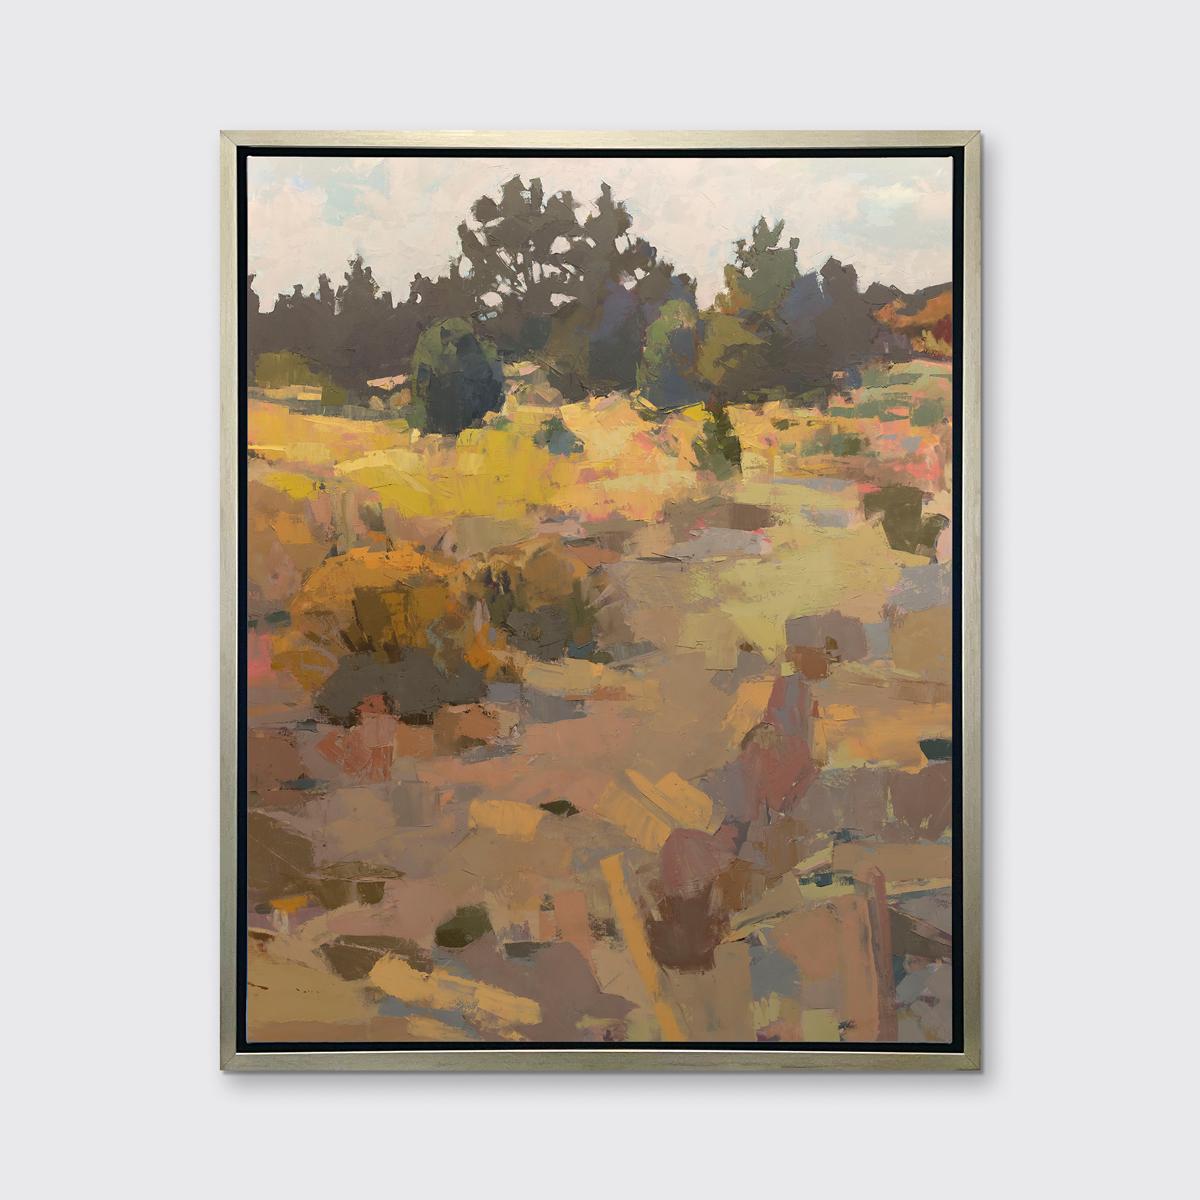 Bri Custer Landscape Print - "Short of Expectations" Framed Limited Edition Print, 45" x 36"